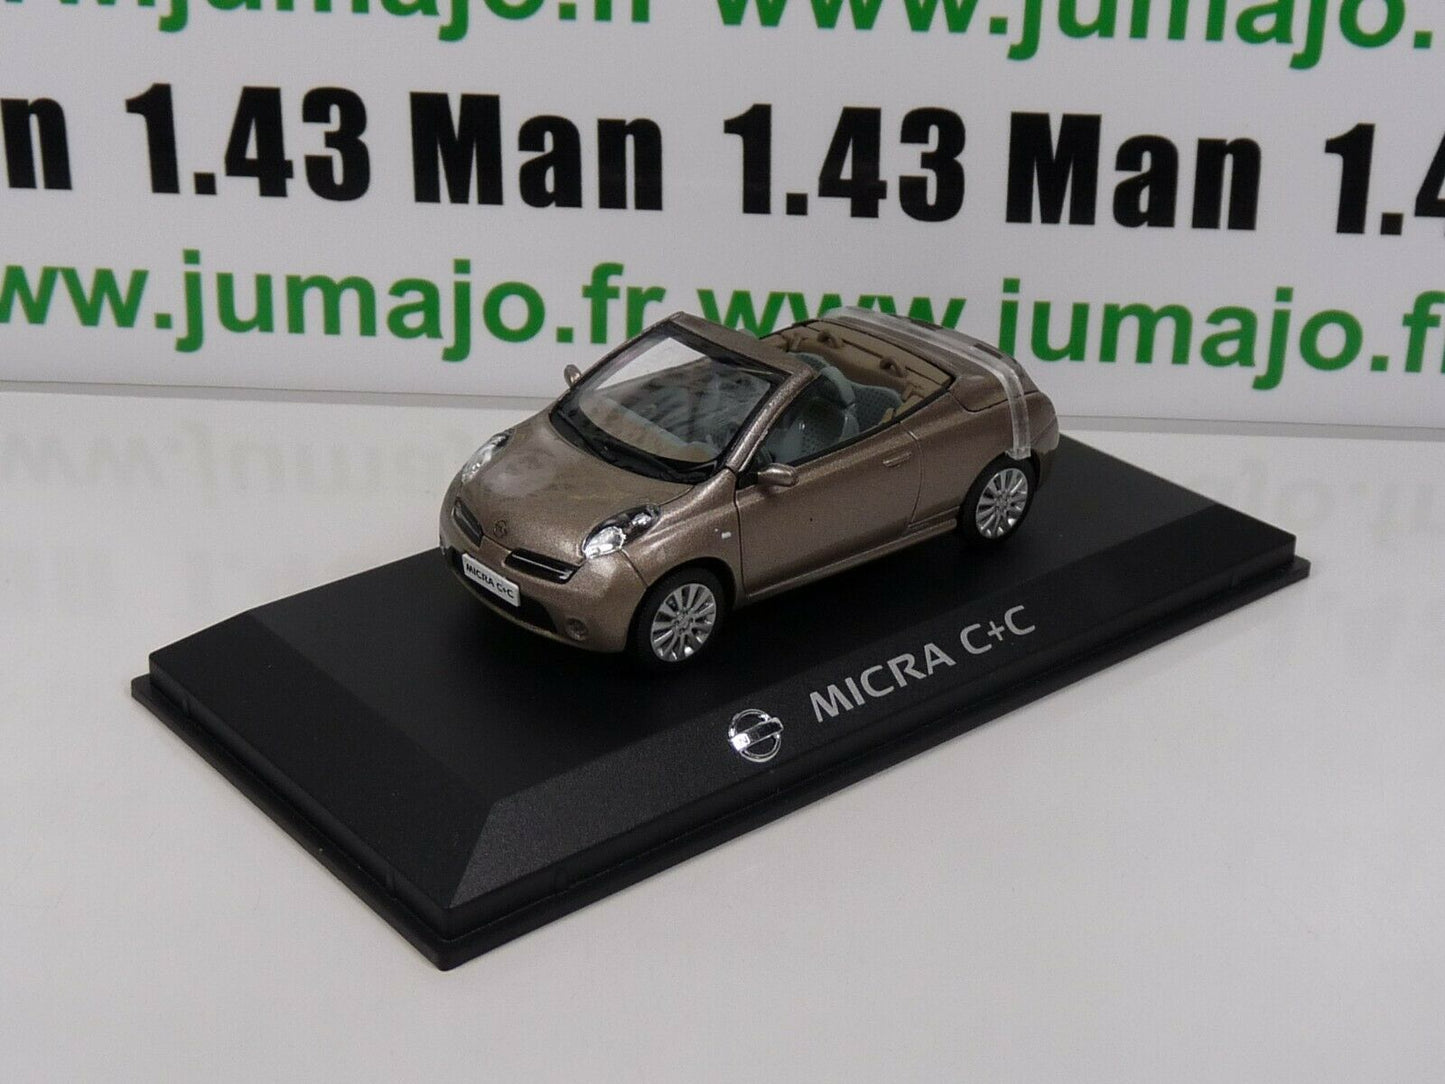 NI3 VOITURE 1/43 J collection : NISSAN MICRA C + C